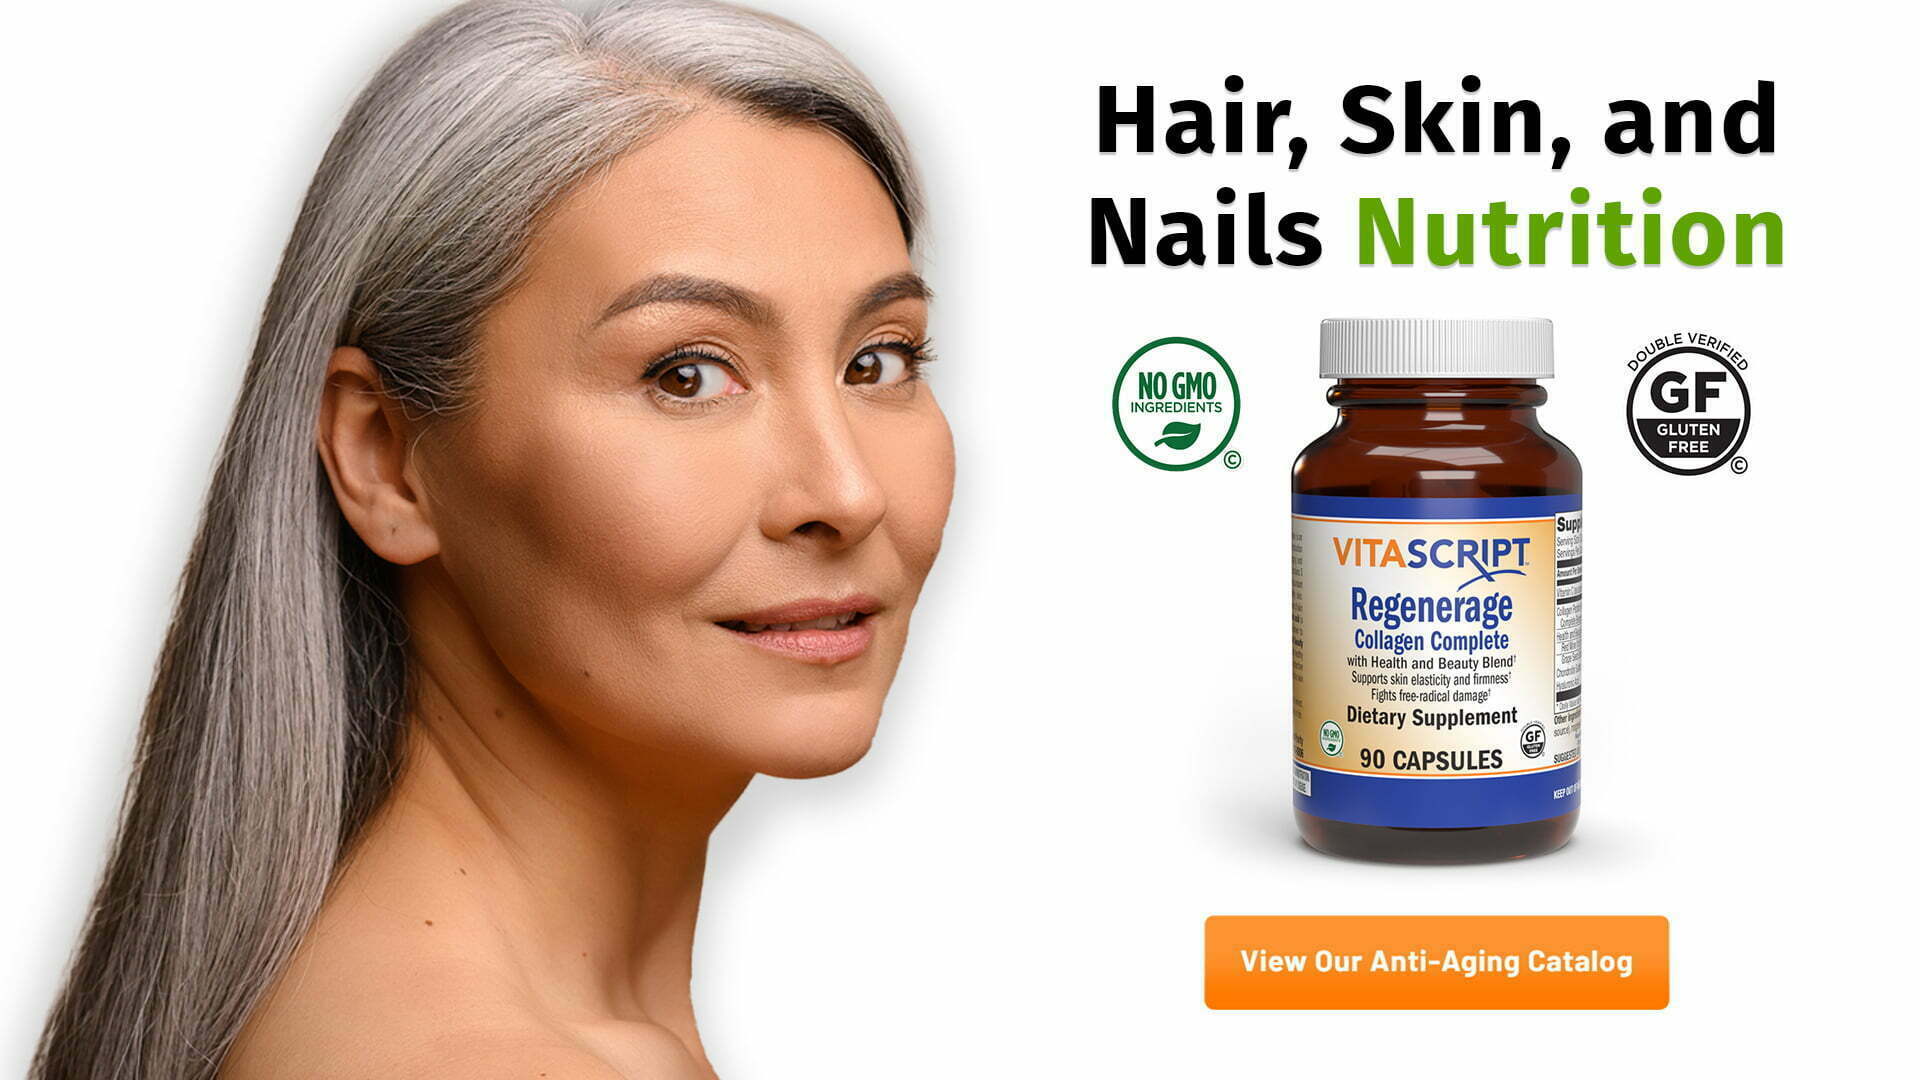 Hair Skin and Nails Nutrition at e-NutritionStore.com